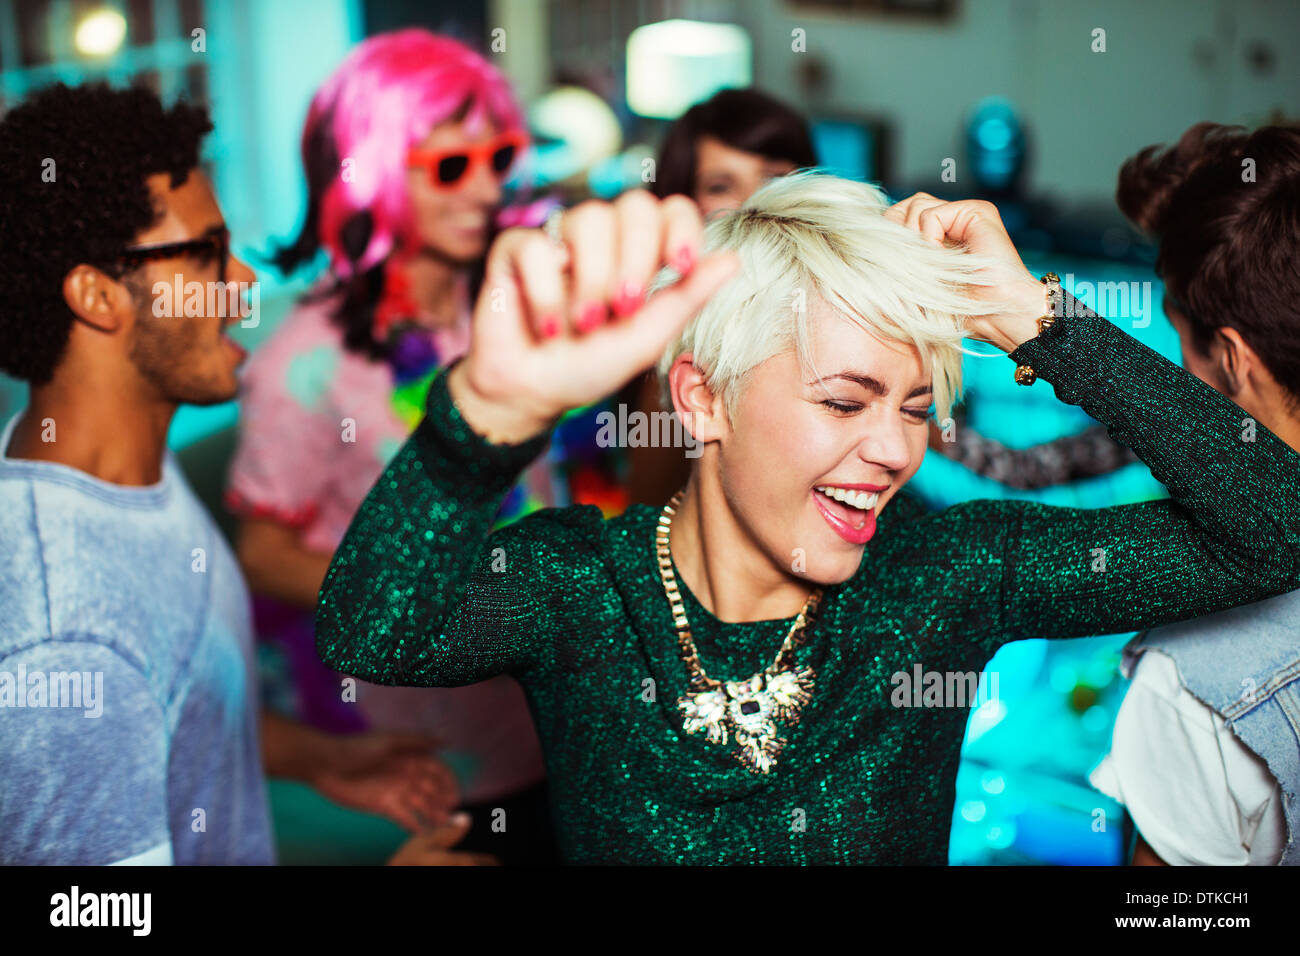 Friends dancing together at party Stock Photo